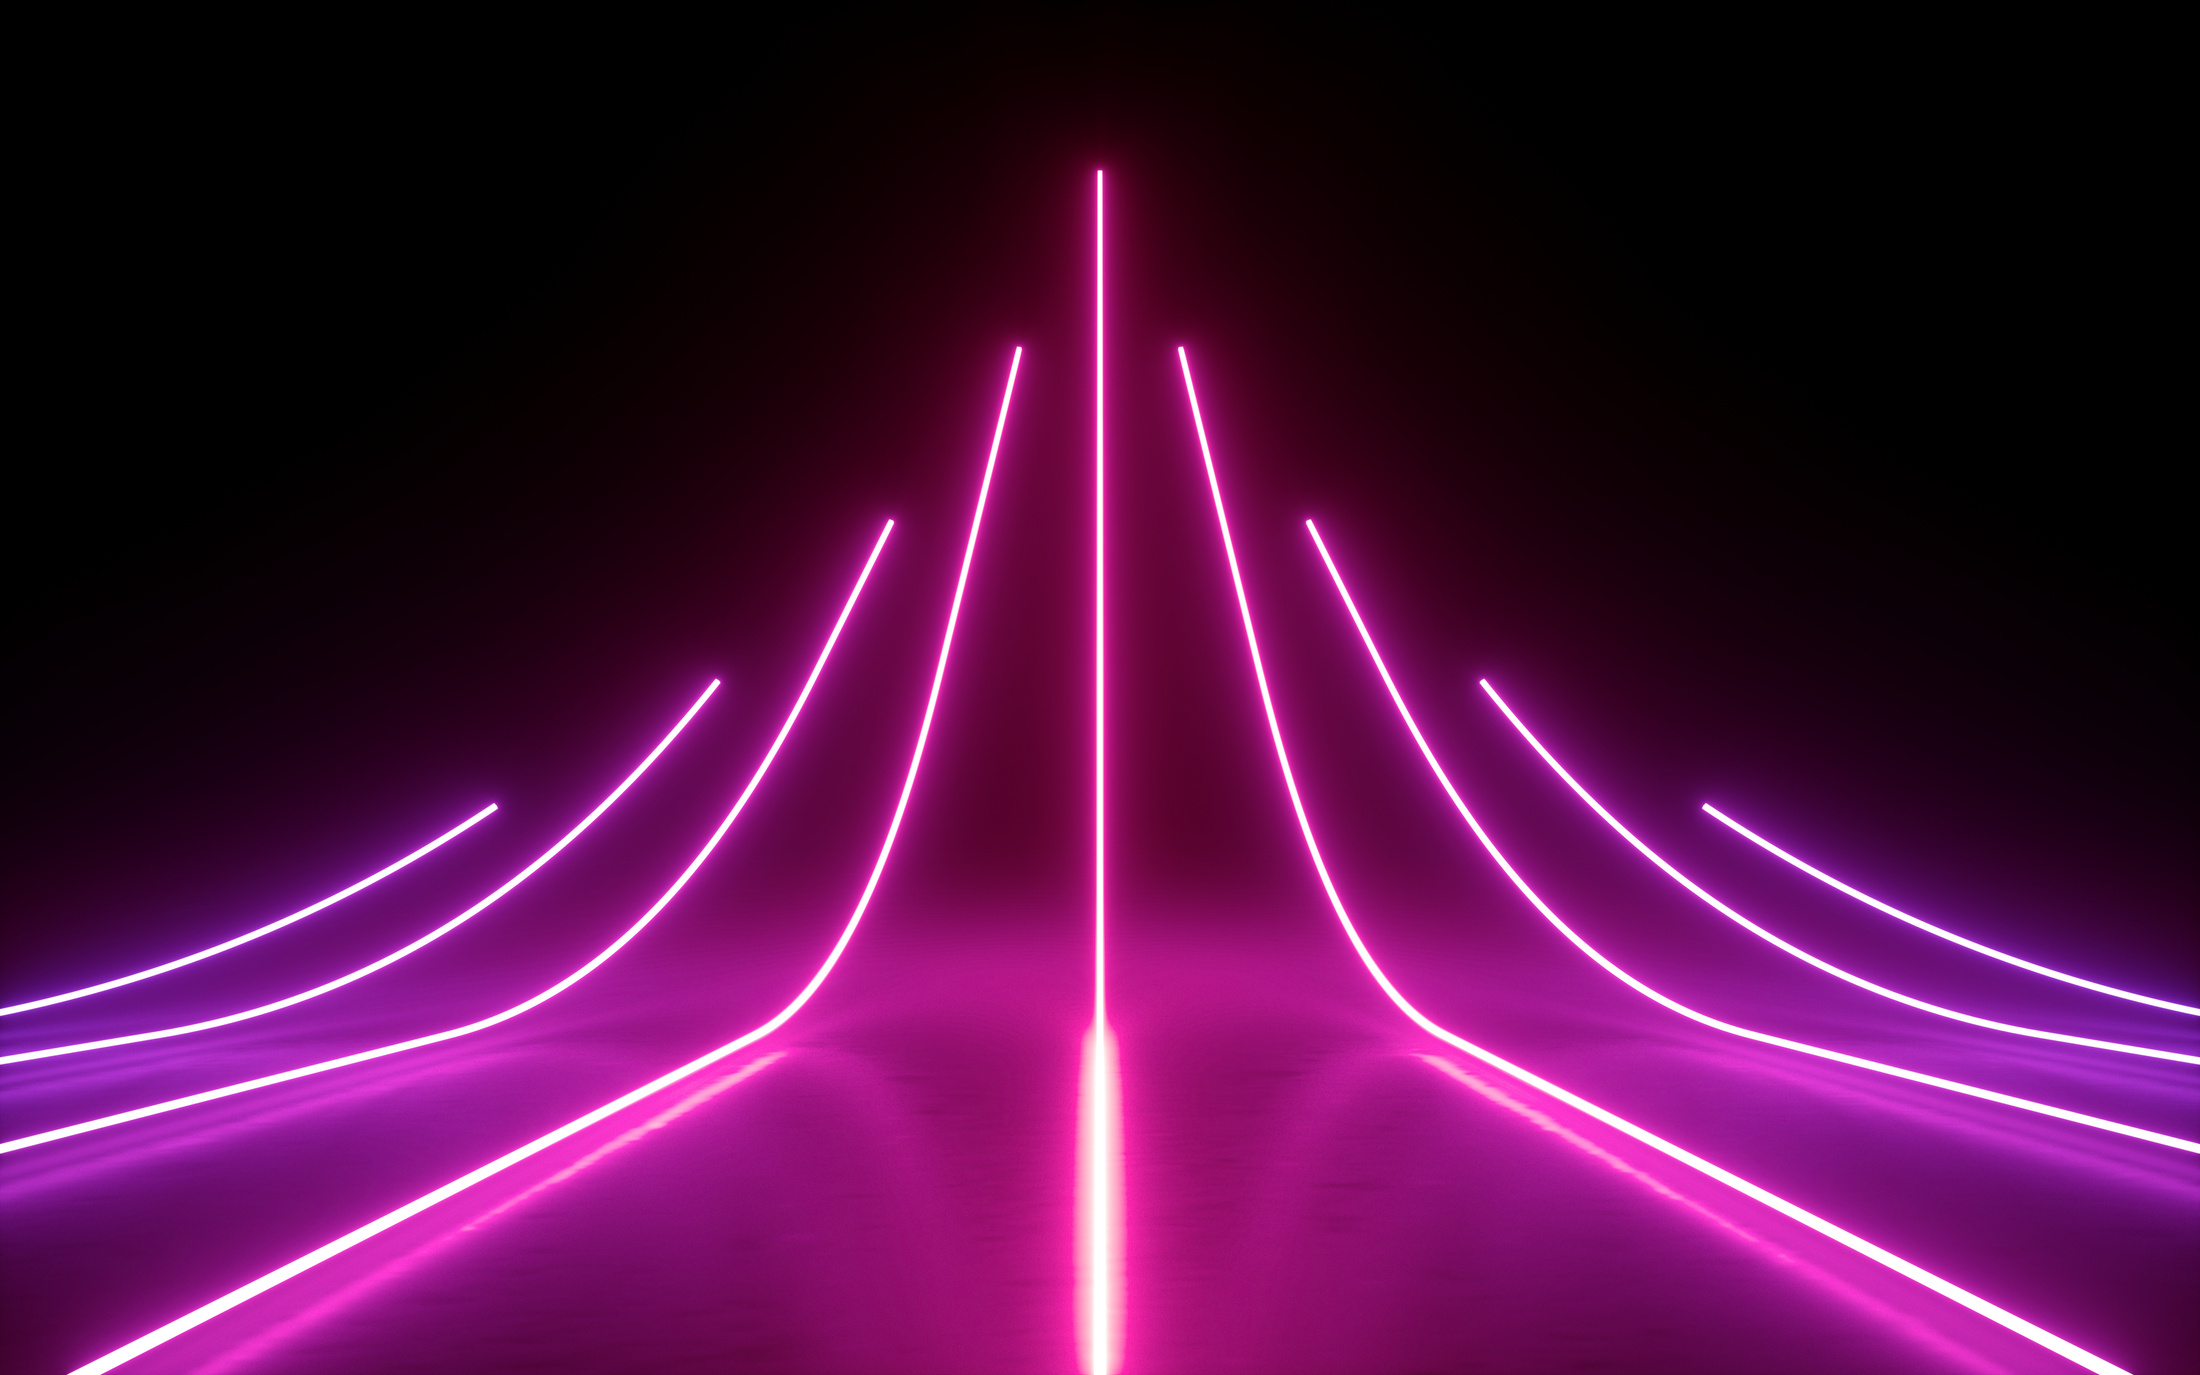 3d render, abstract minimal background, glowing lines, arrow, chart, pink neon lights, virtual reality, laser show